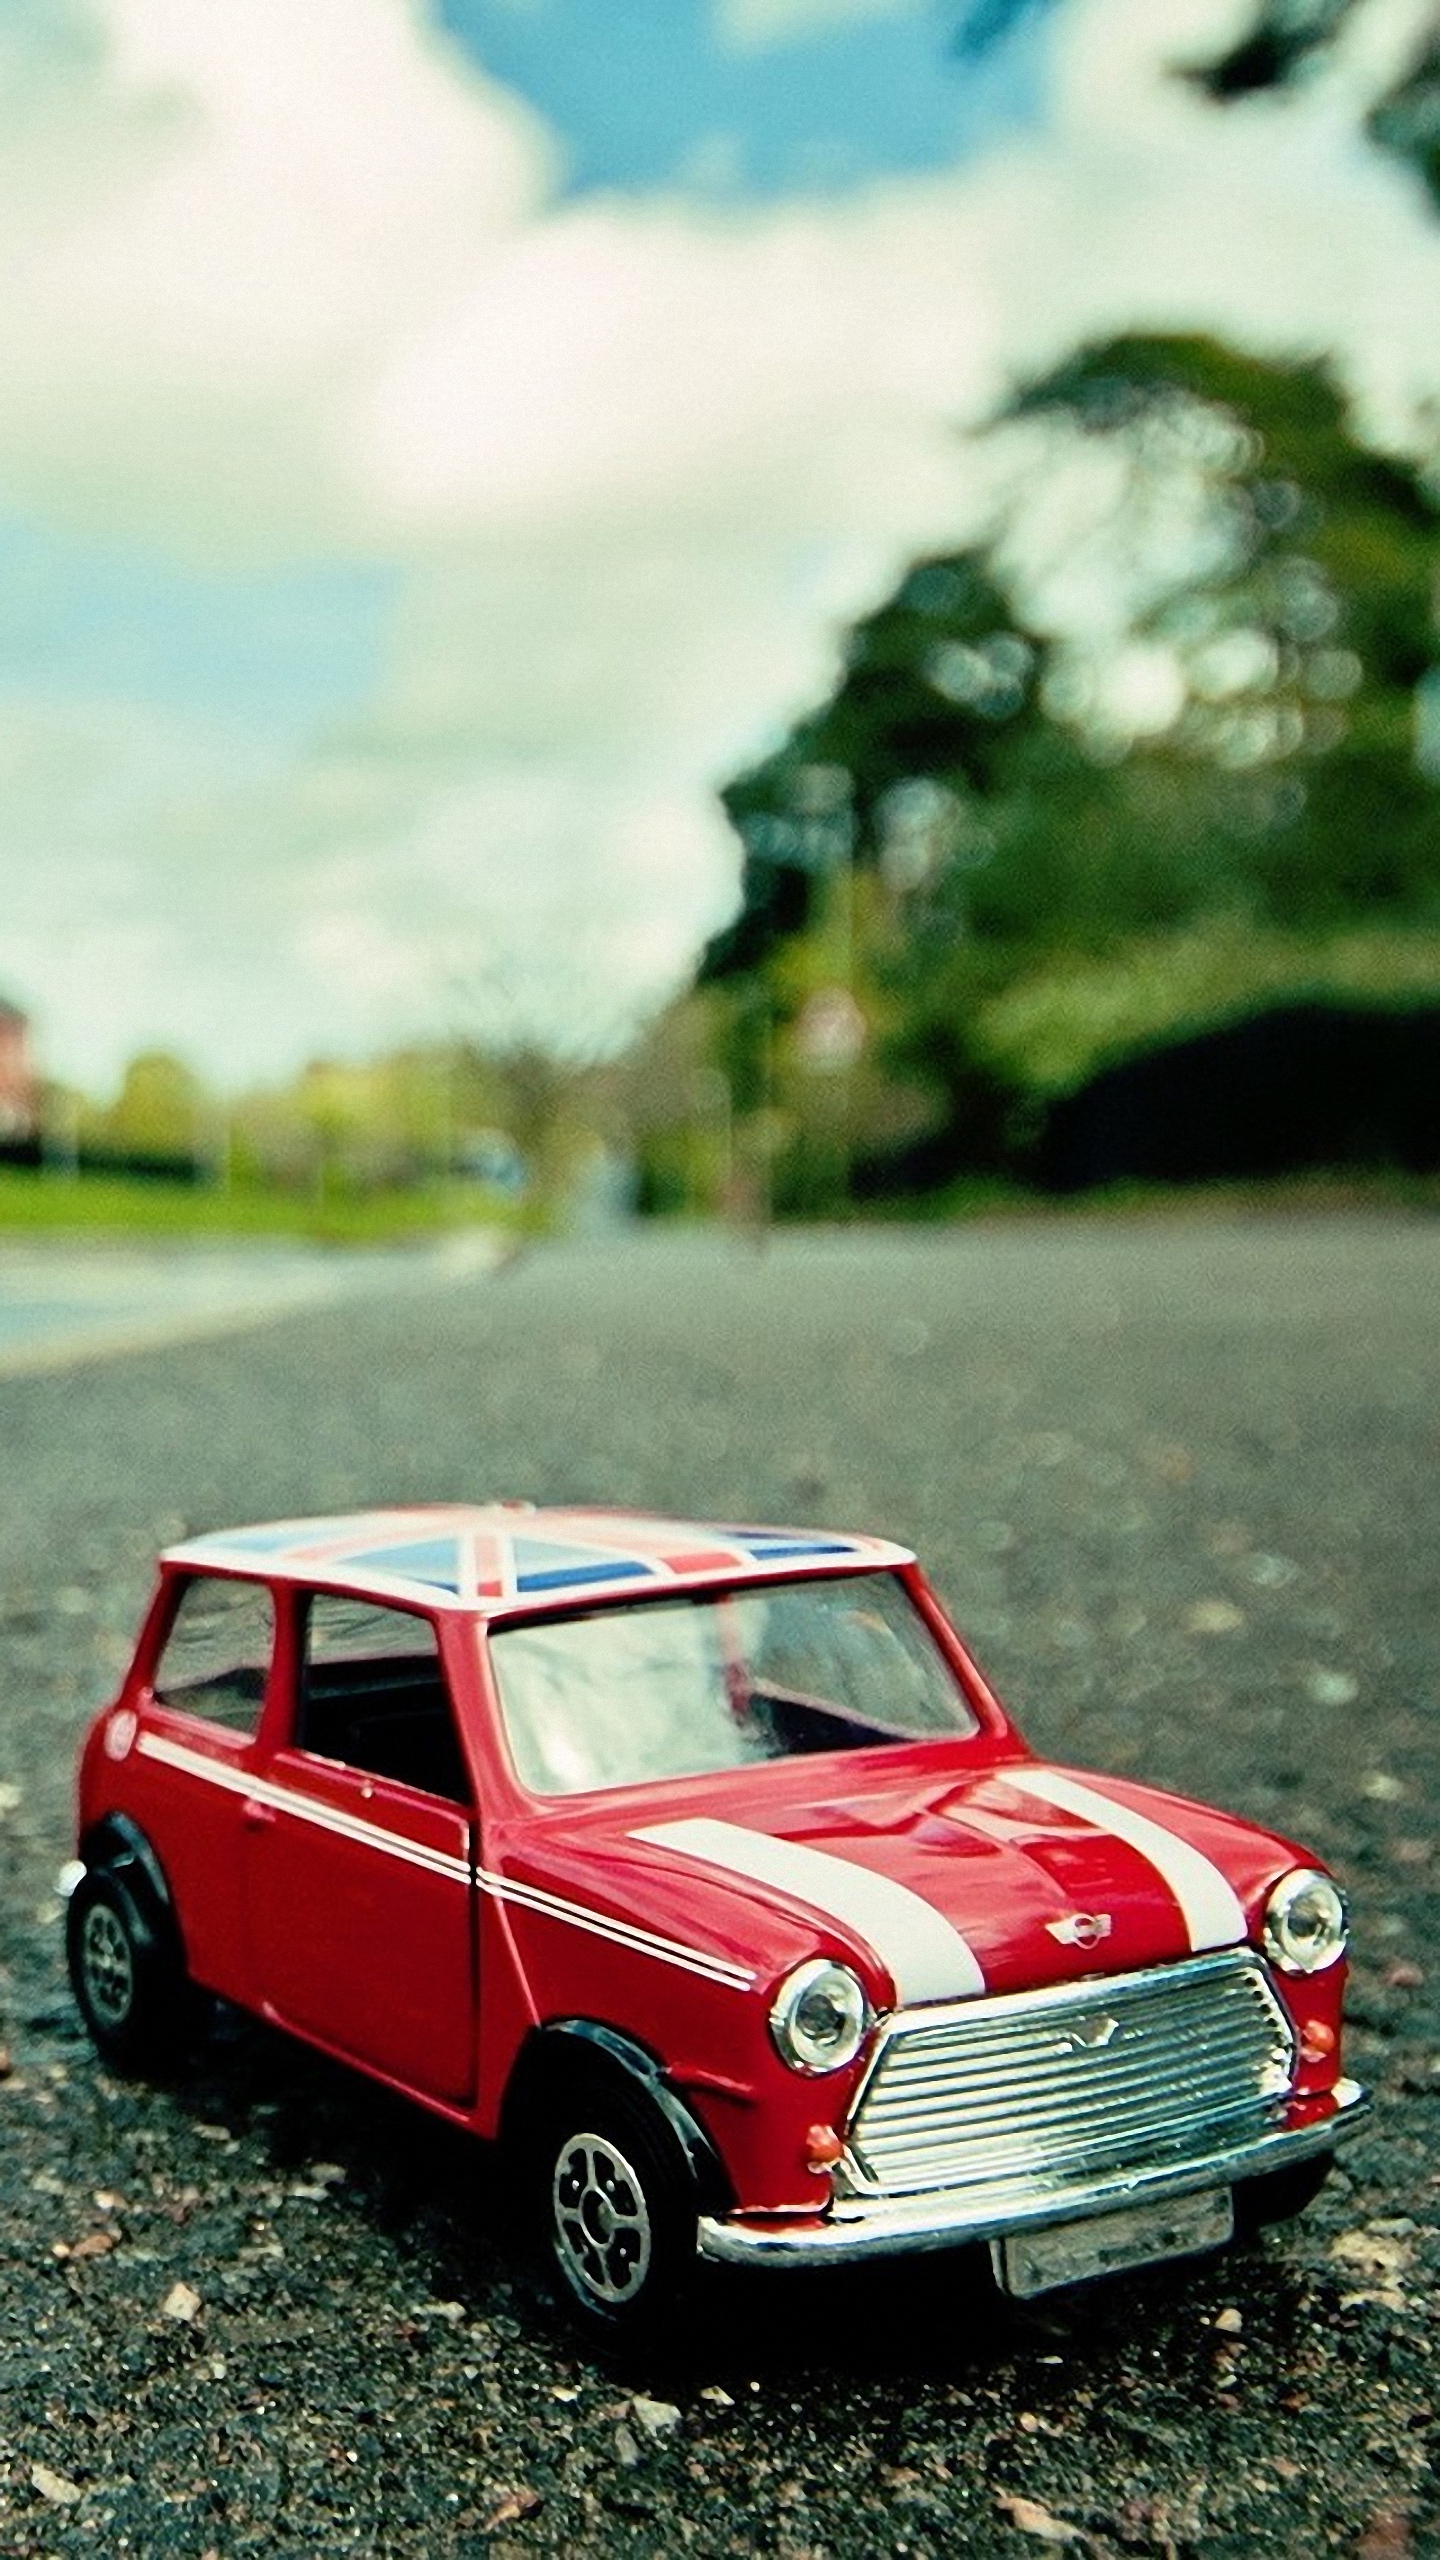 Hd Toy Car Lg G3 Wallpapers - Miniature Wallpaper For Mobile - 1440x2560  Wallpaper 